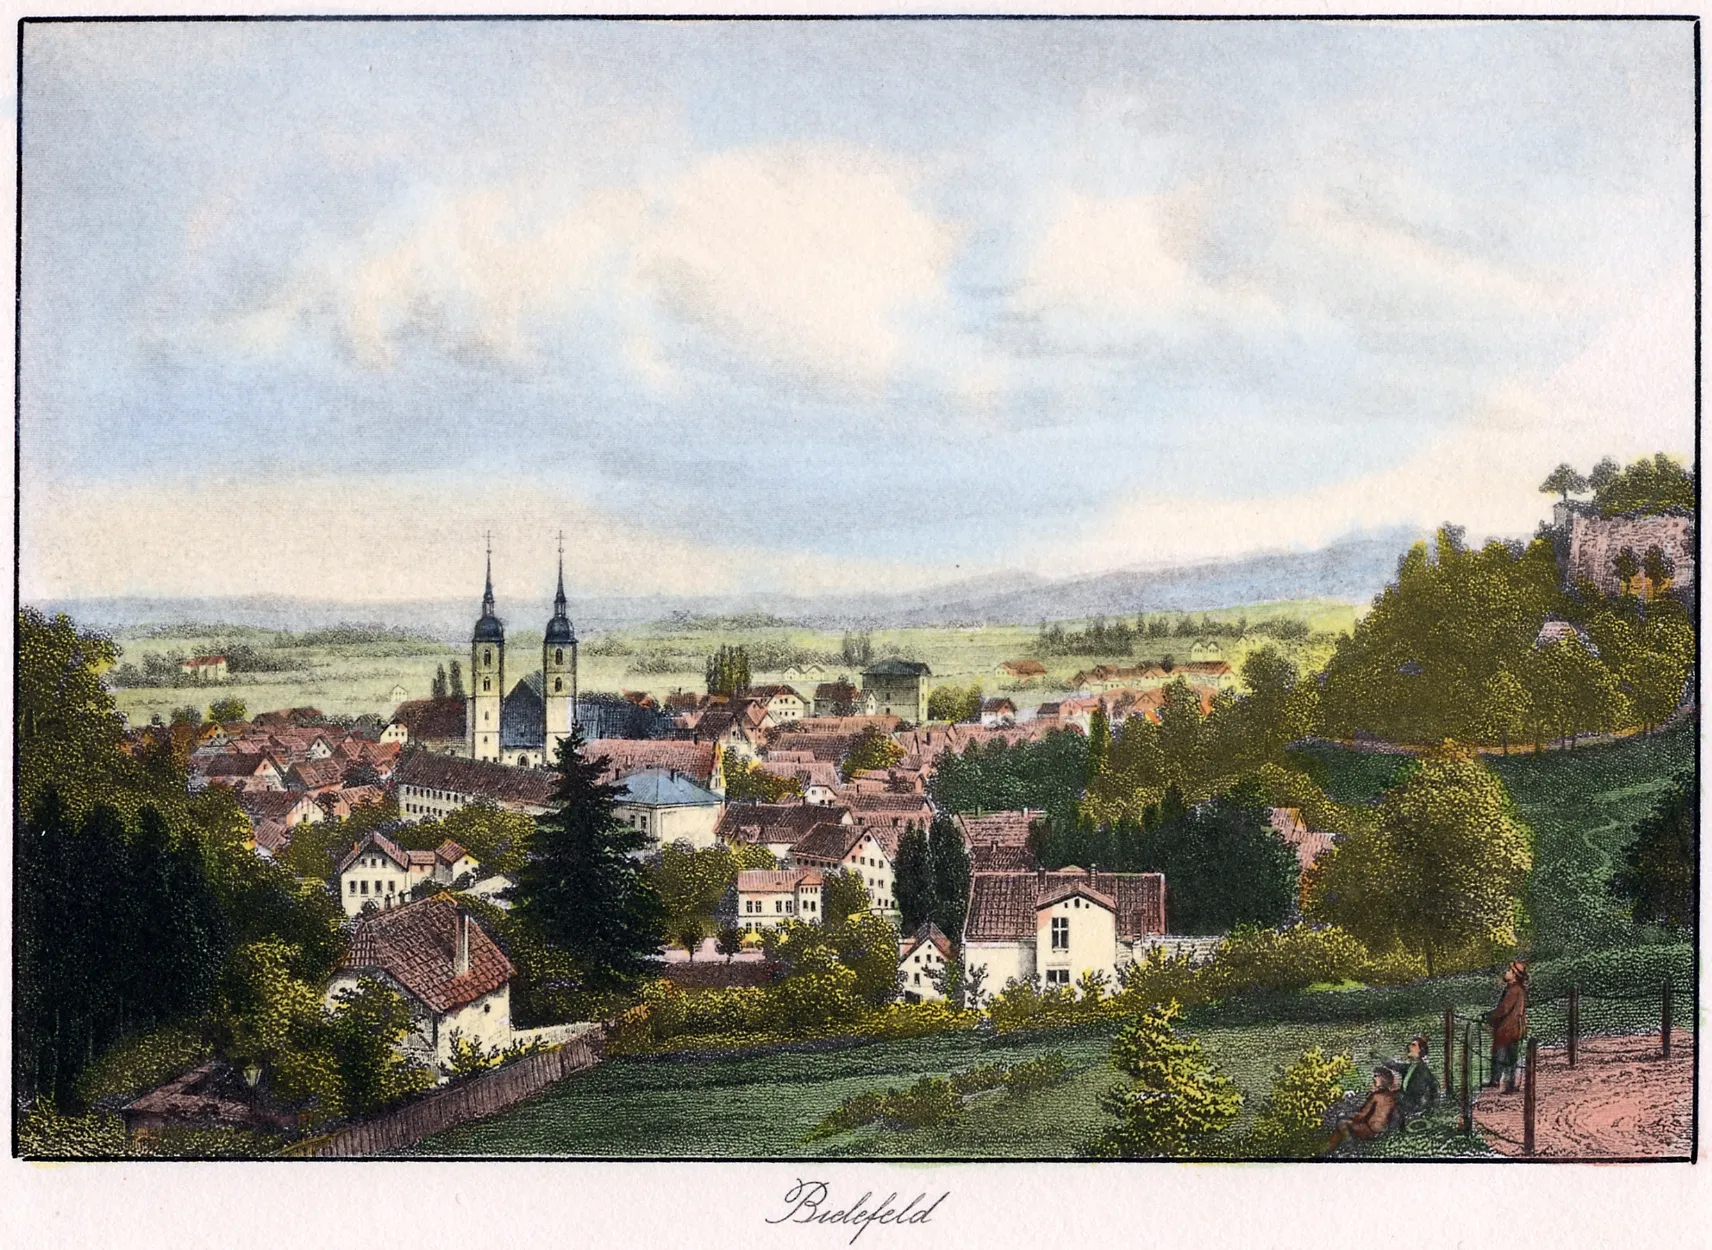 Photo showing: View form mount Johannisberg in Bielefeld upon the "Neustadt" (part of the city) and a fortification of Sparrenburg castle mid 19th century